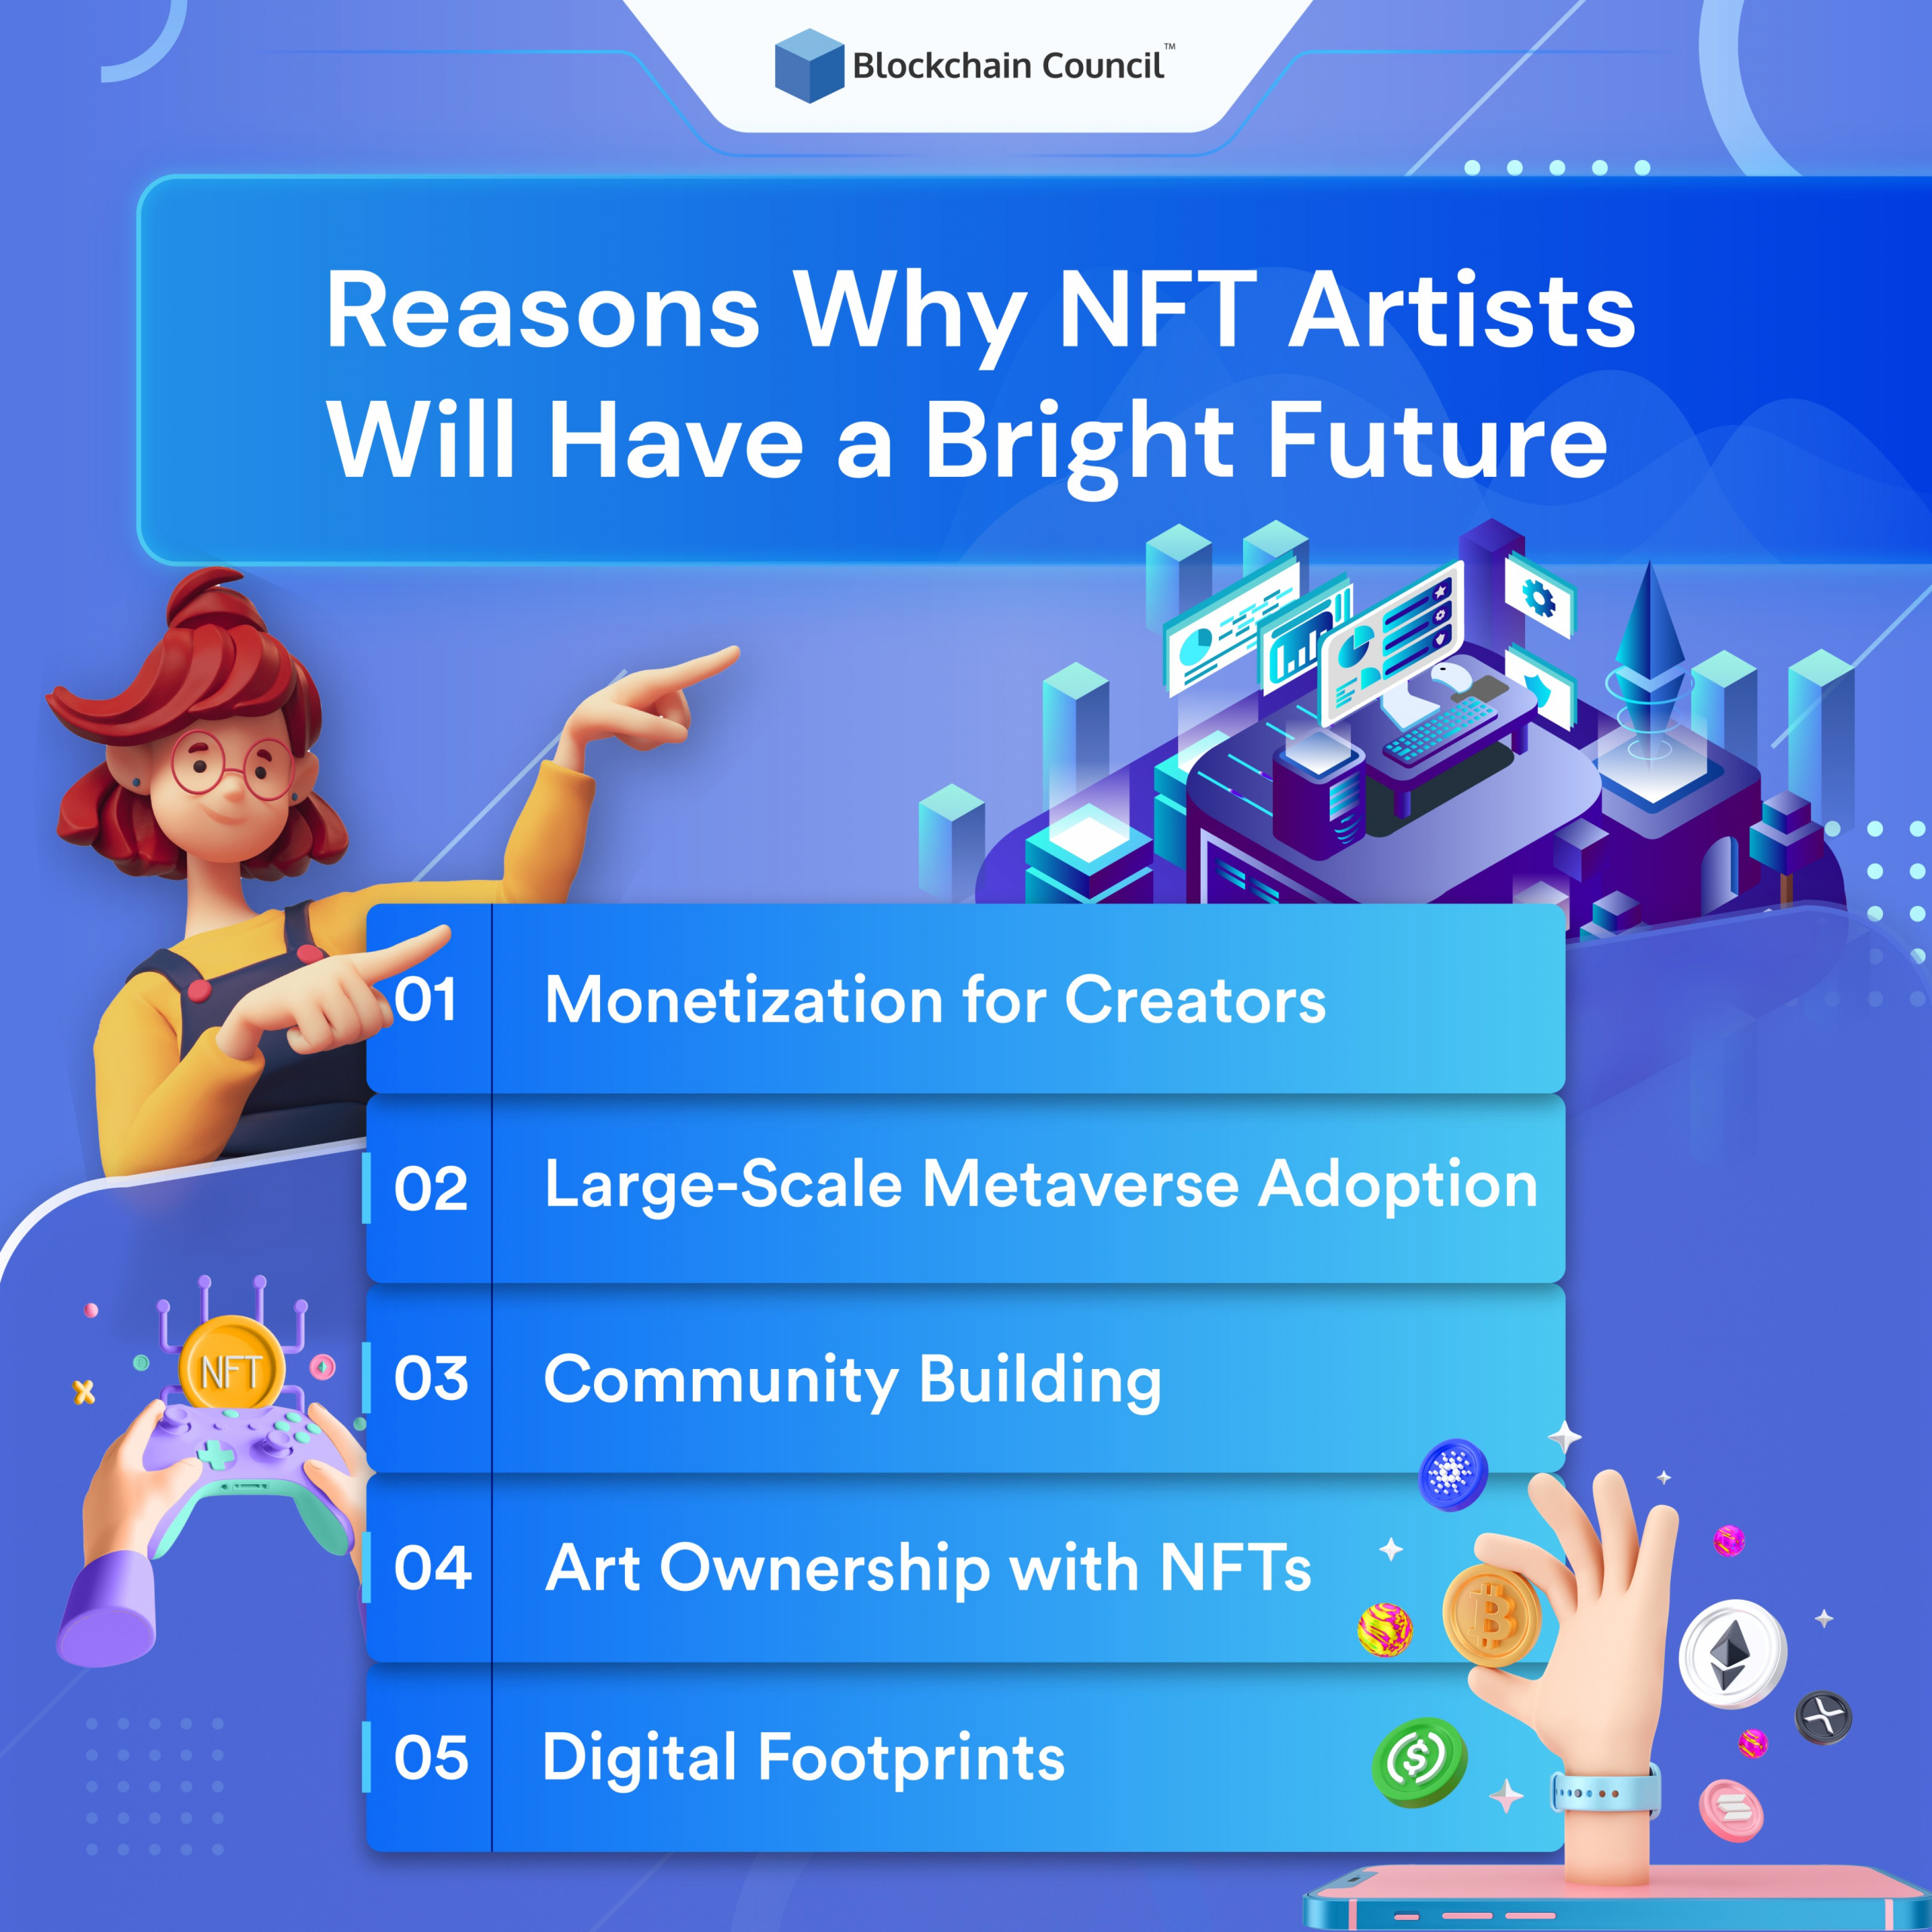 Reasons Why Nft Artists Will Have a Bright Future